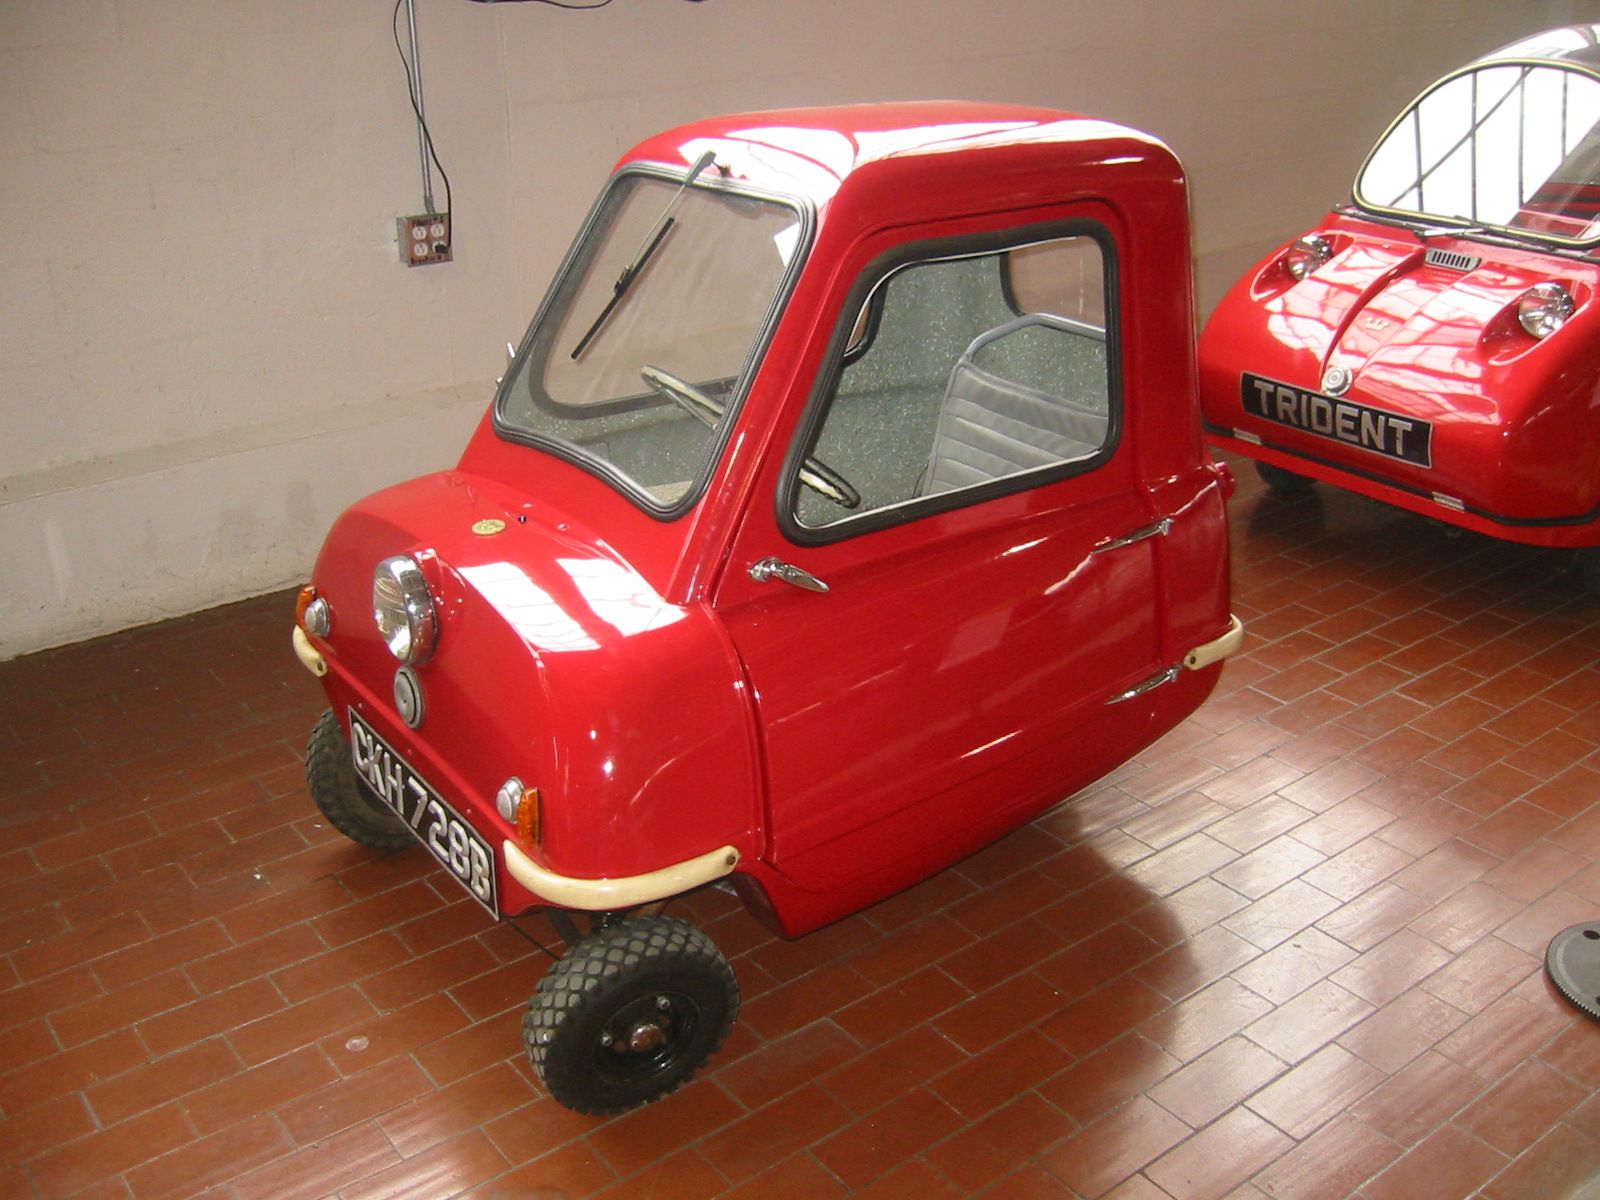 The Peel P50 is the tiniest car in the world